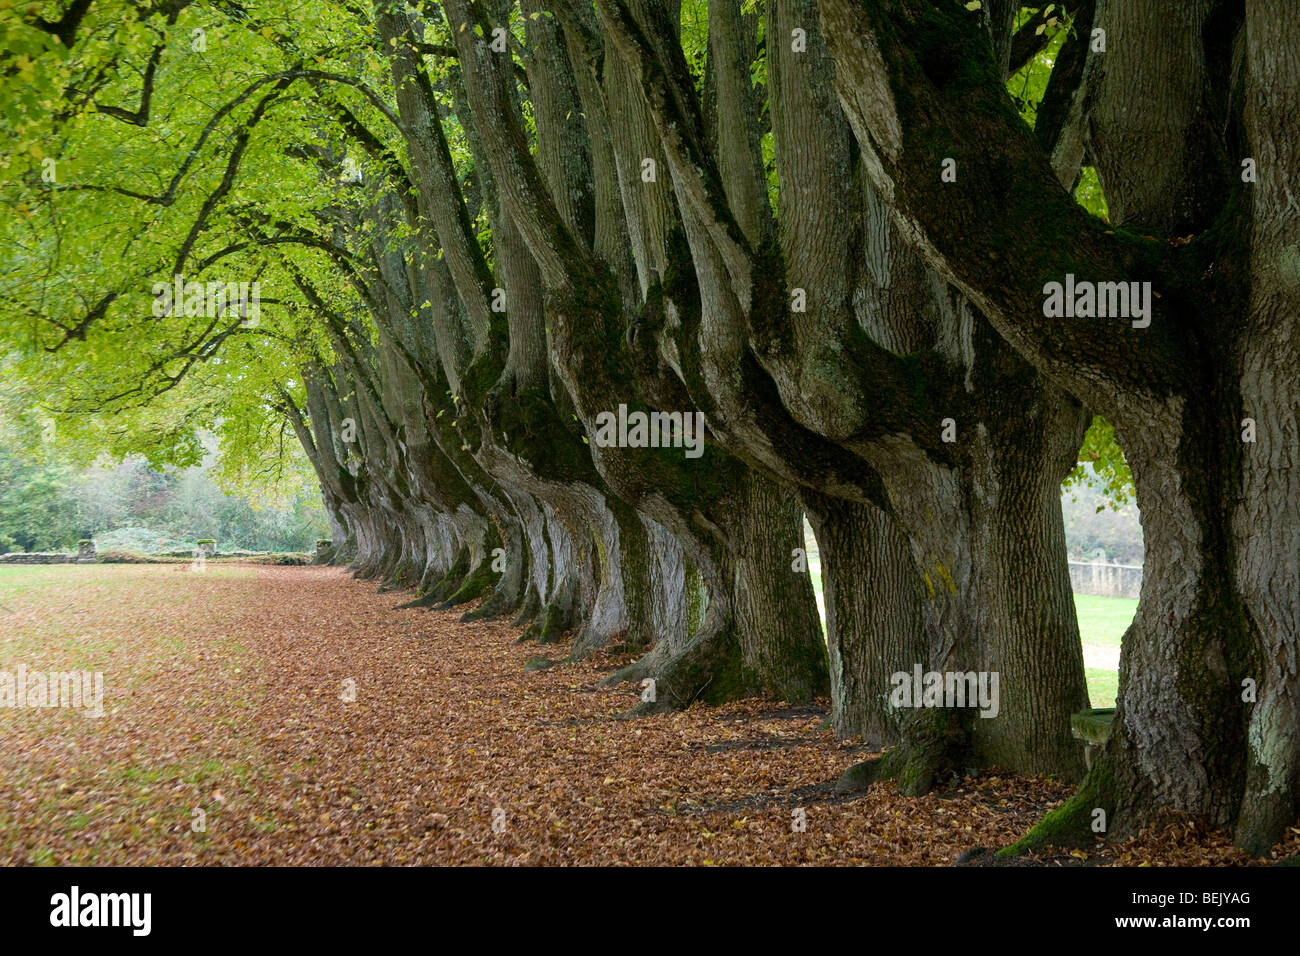 Row of small leaved lime trees (Tilia cordata) in garden of the Cistercian abbey of Noirlac, France Stock Photo